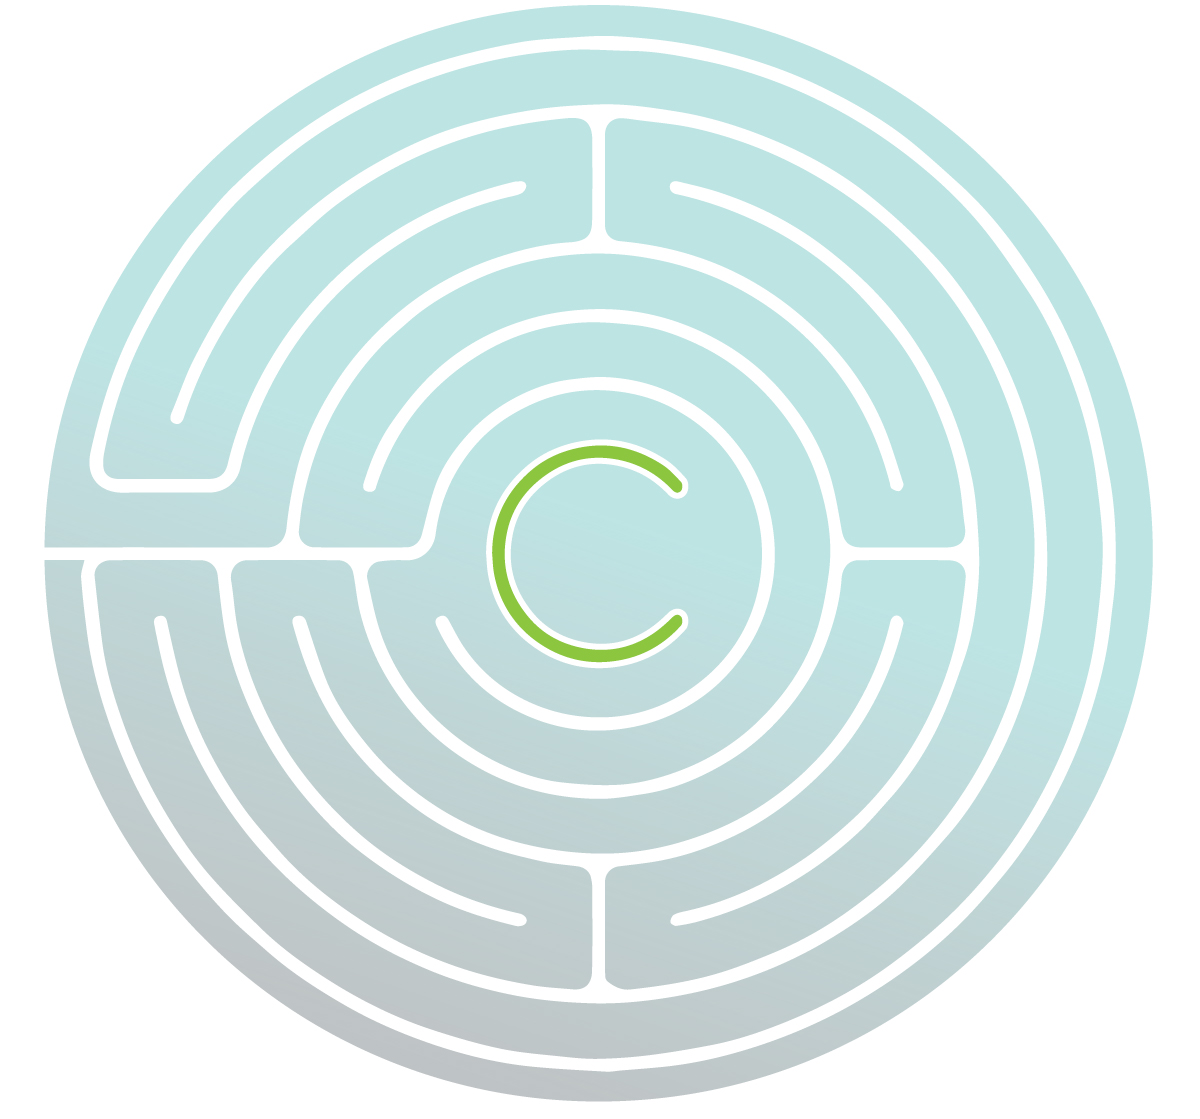 image of a labyrinth with a light blue background and a lowercase c in the center